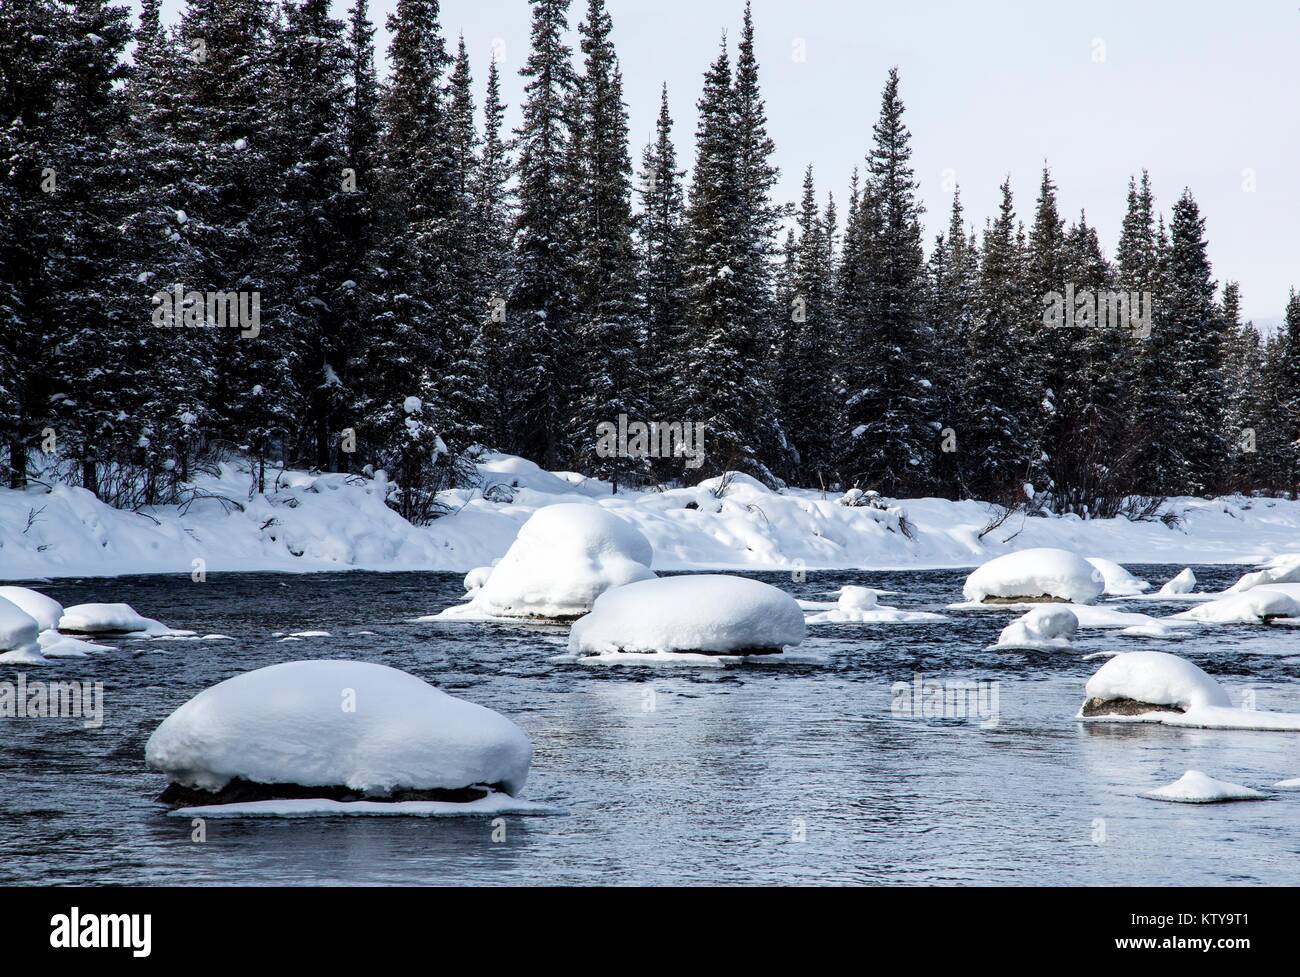 Water flows around snowy rocks at the Gulkana Wild and Scenic River March 18, 2016 in Alaska. Stock Photo